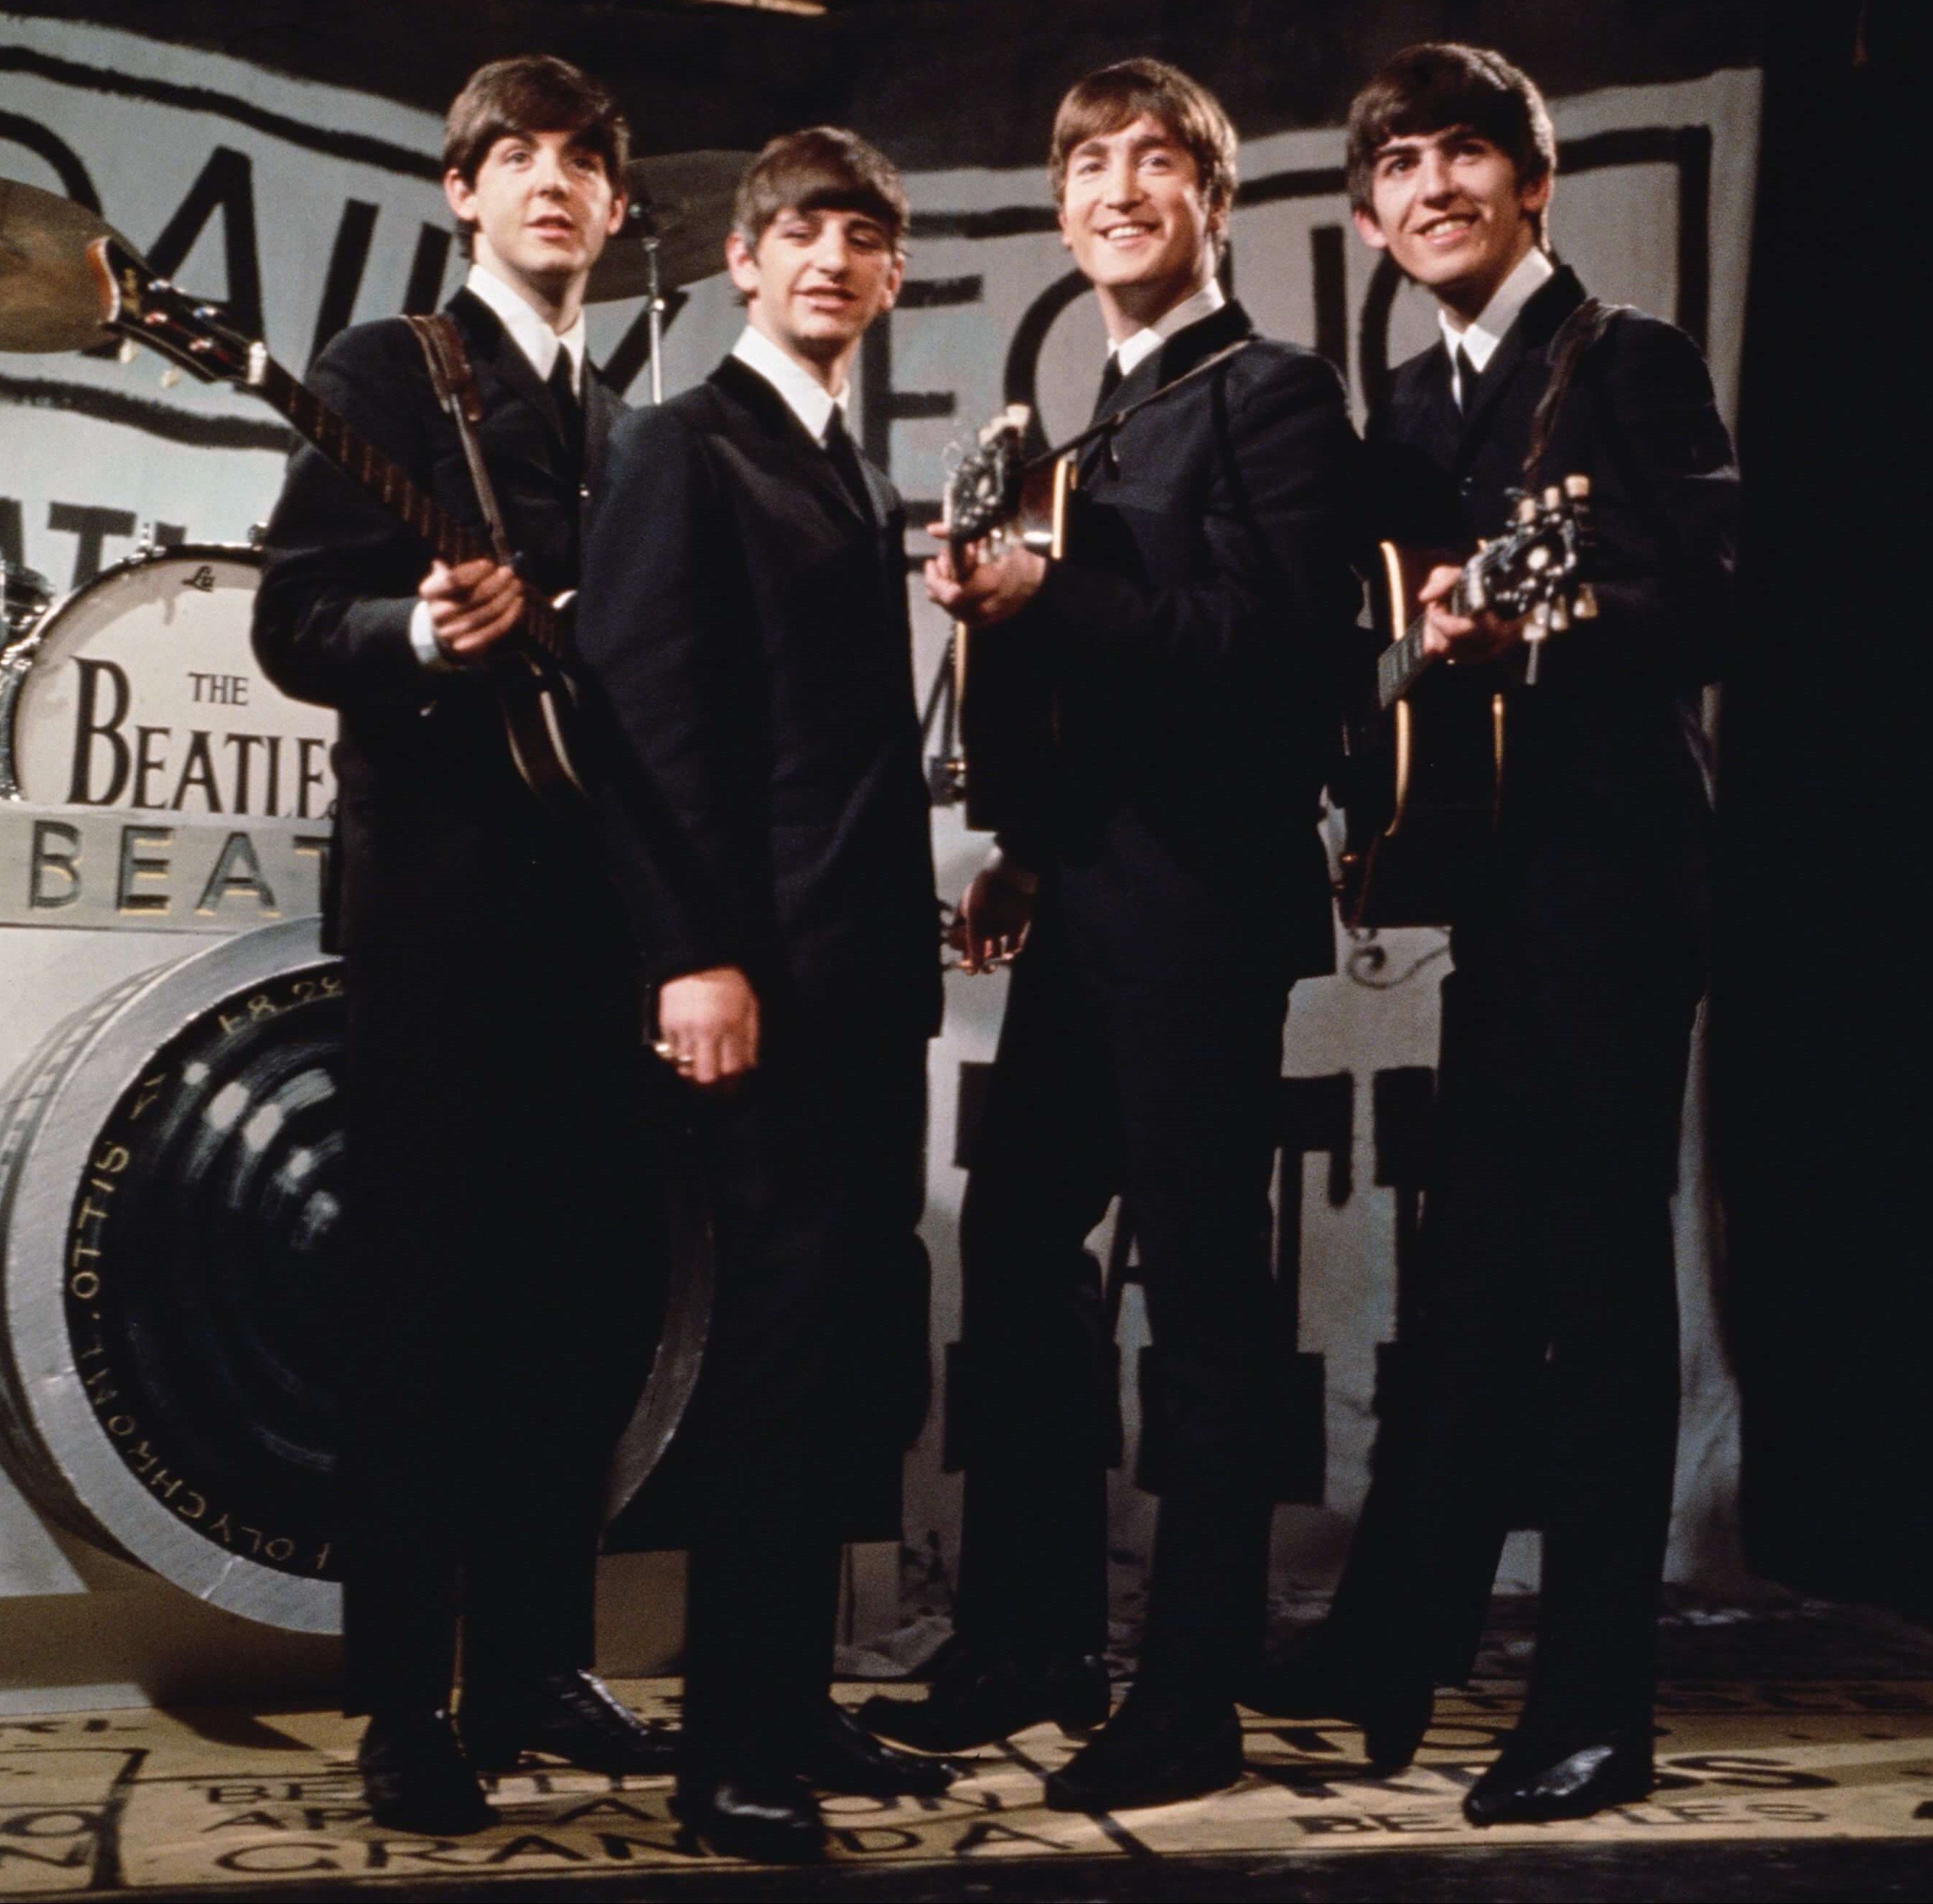 The Beatles in suits during the "She Loves You" era